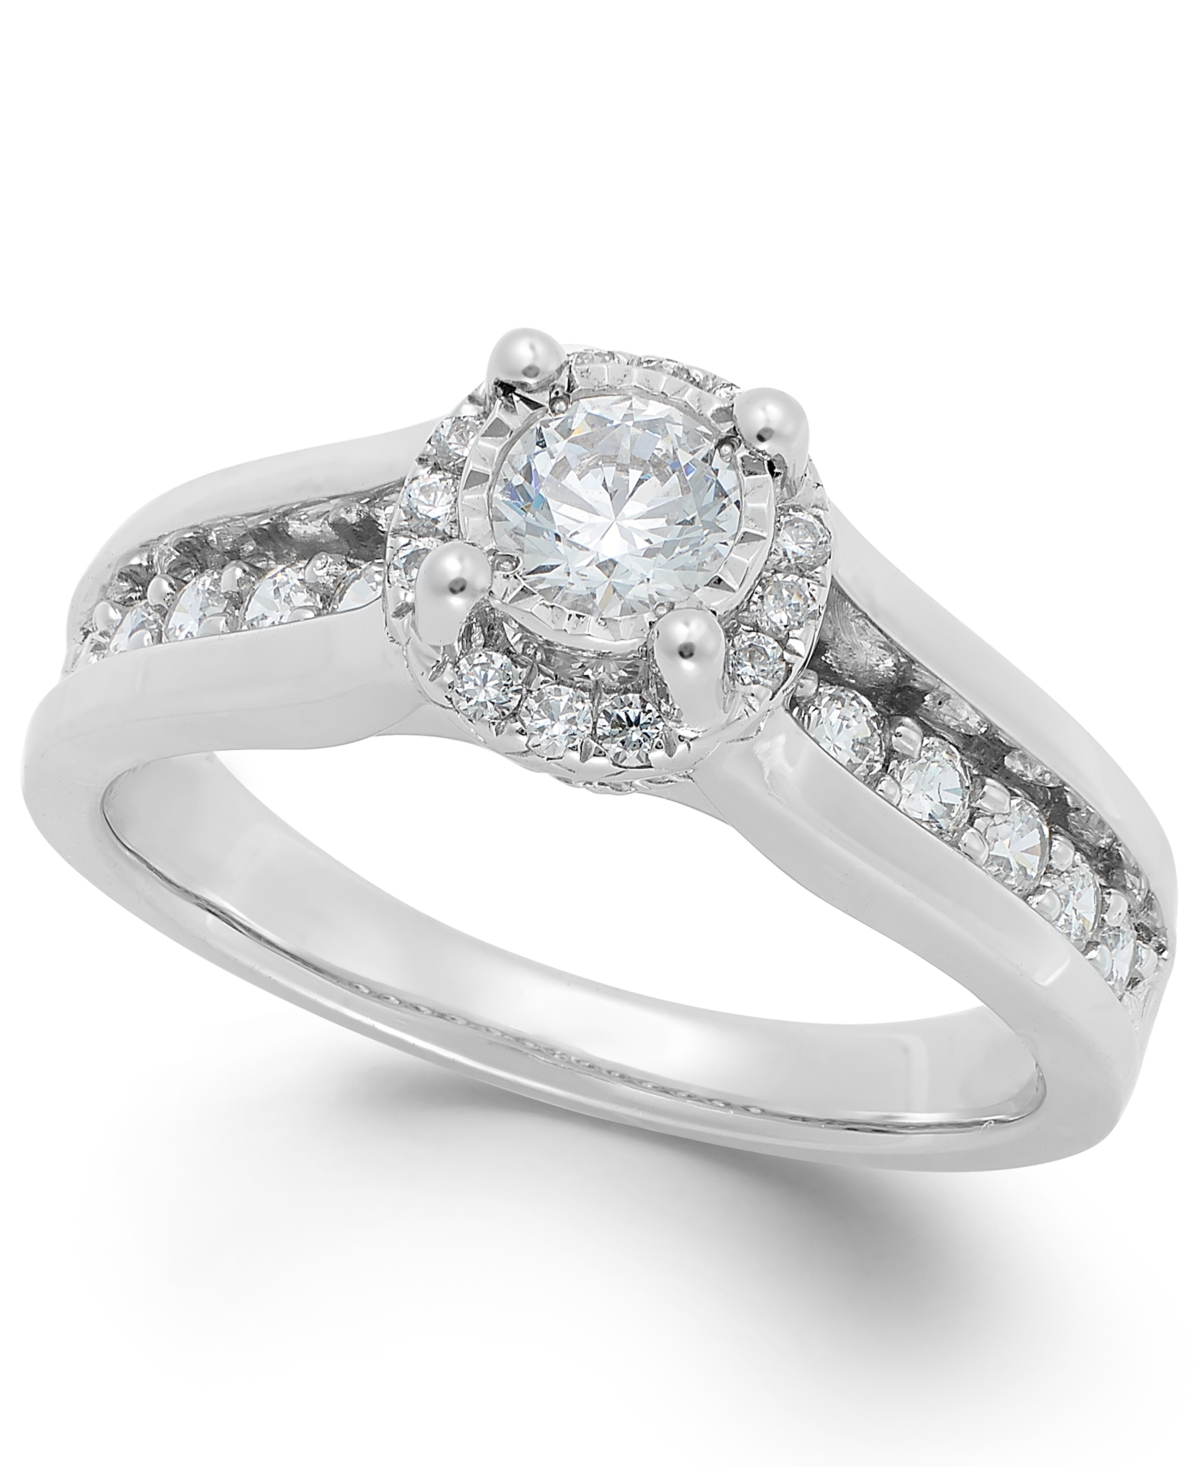 Diamond Channel Halo Engagement Ring (1 ct. t.w.) in 14k White Gold - White Gold